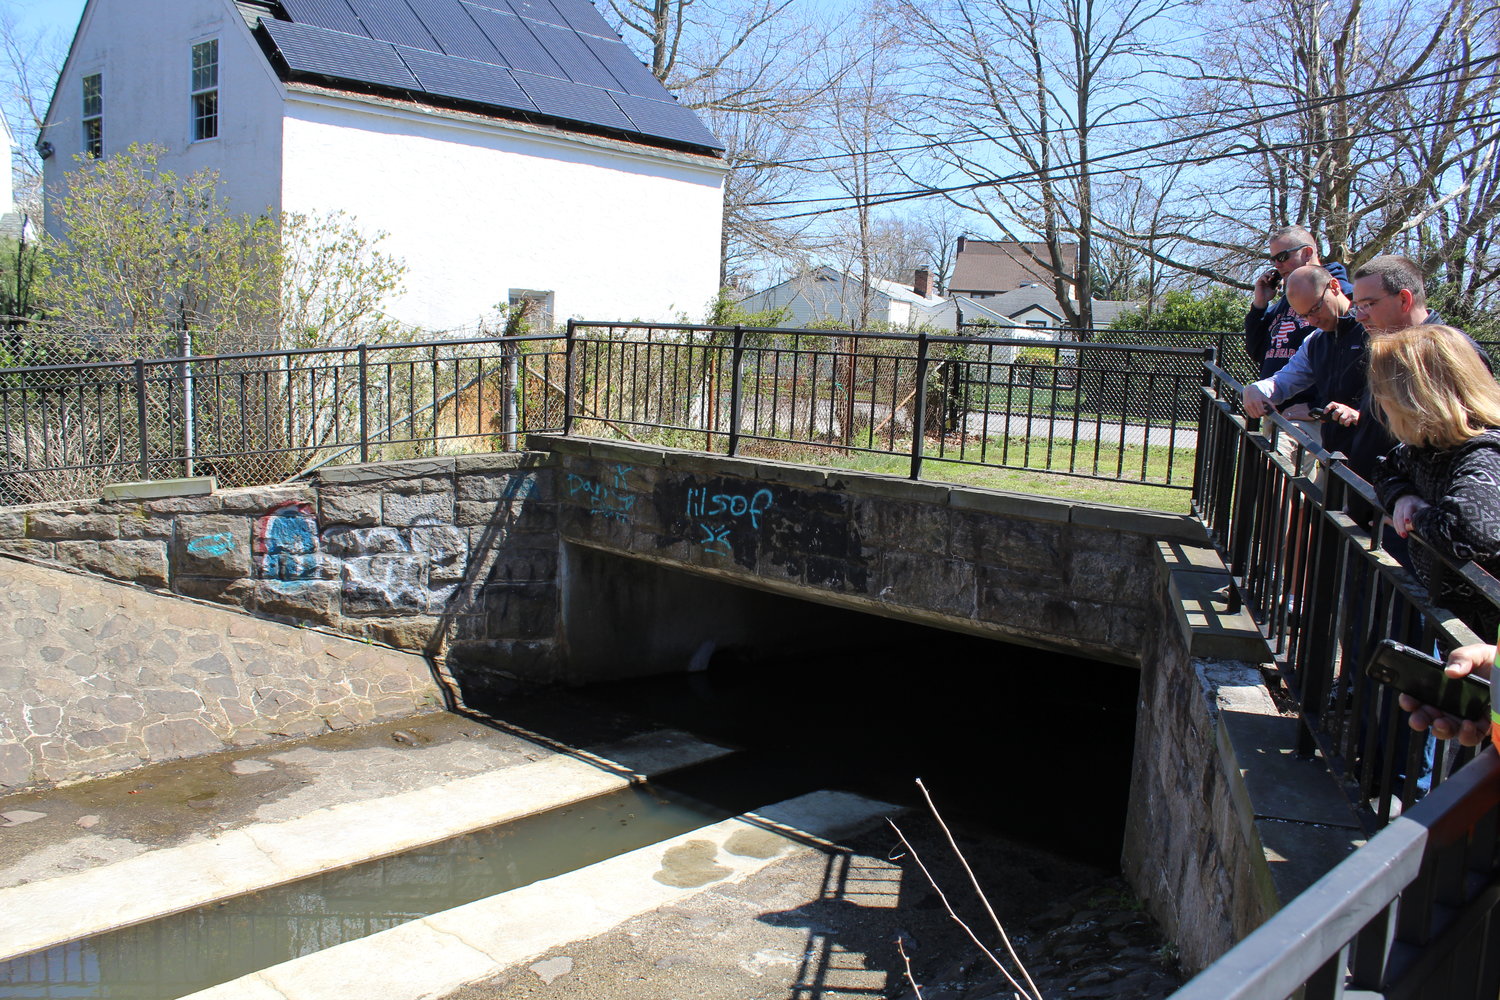 Community members inspected the fish scaffold, in which the passage was deepened from two to four inches.